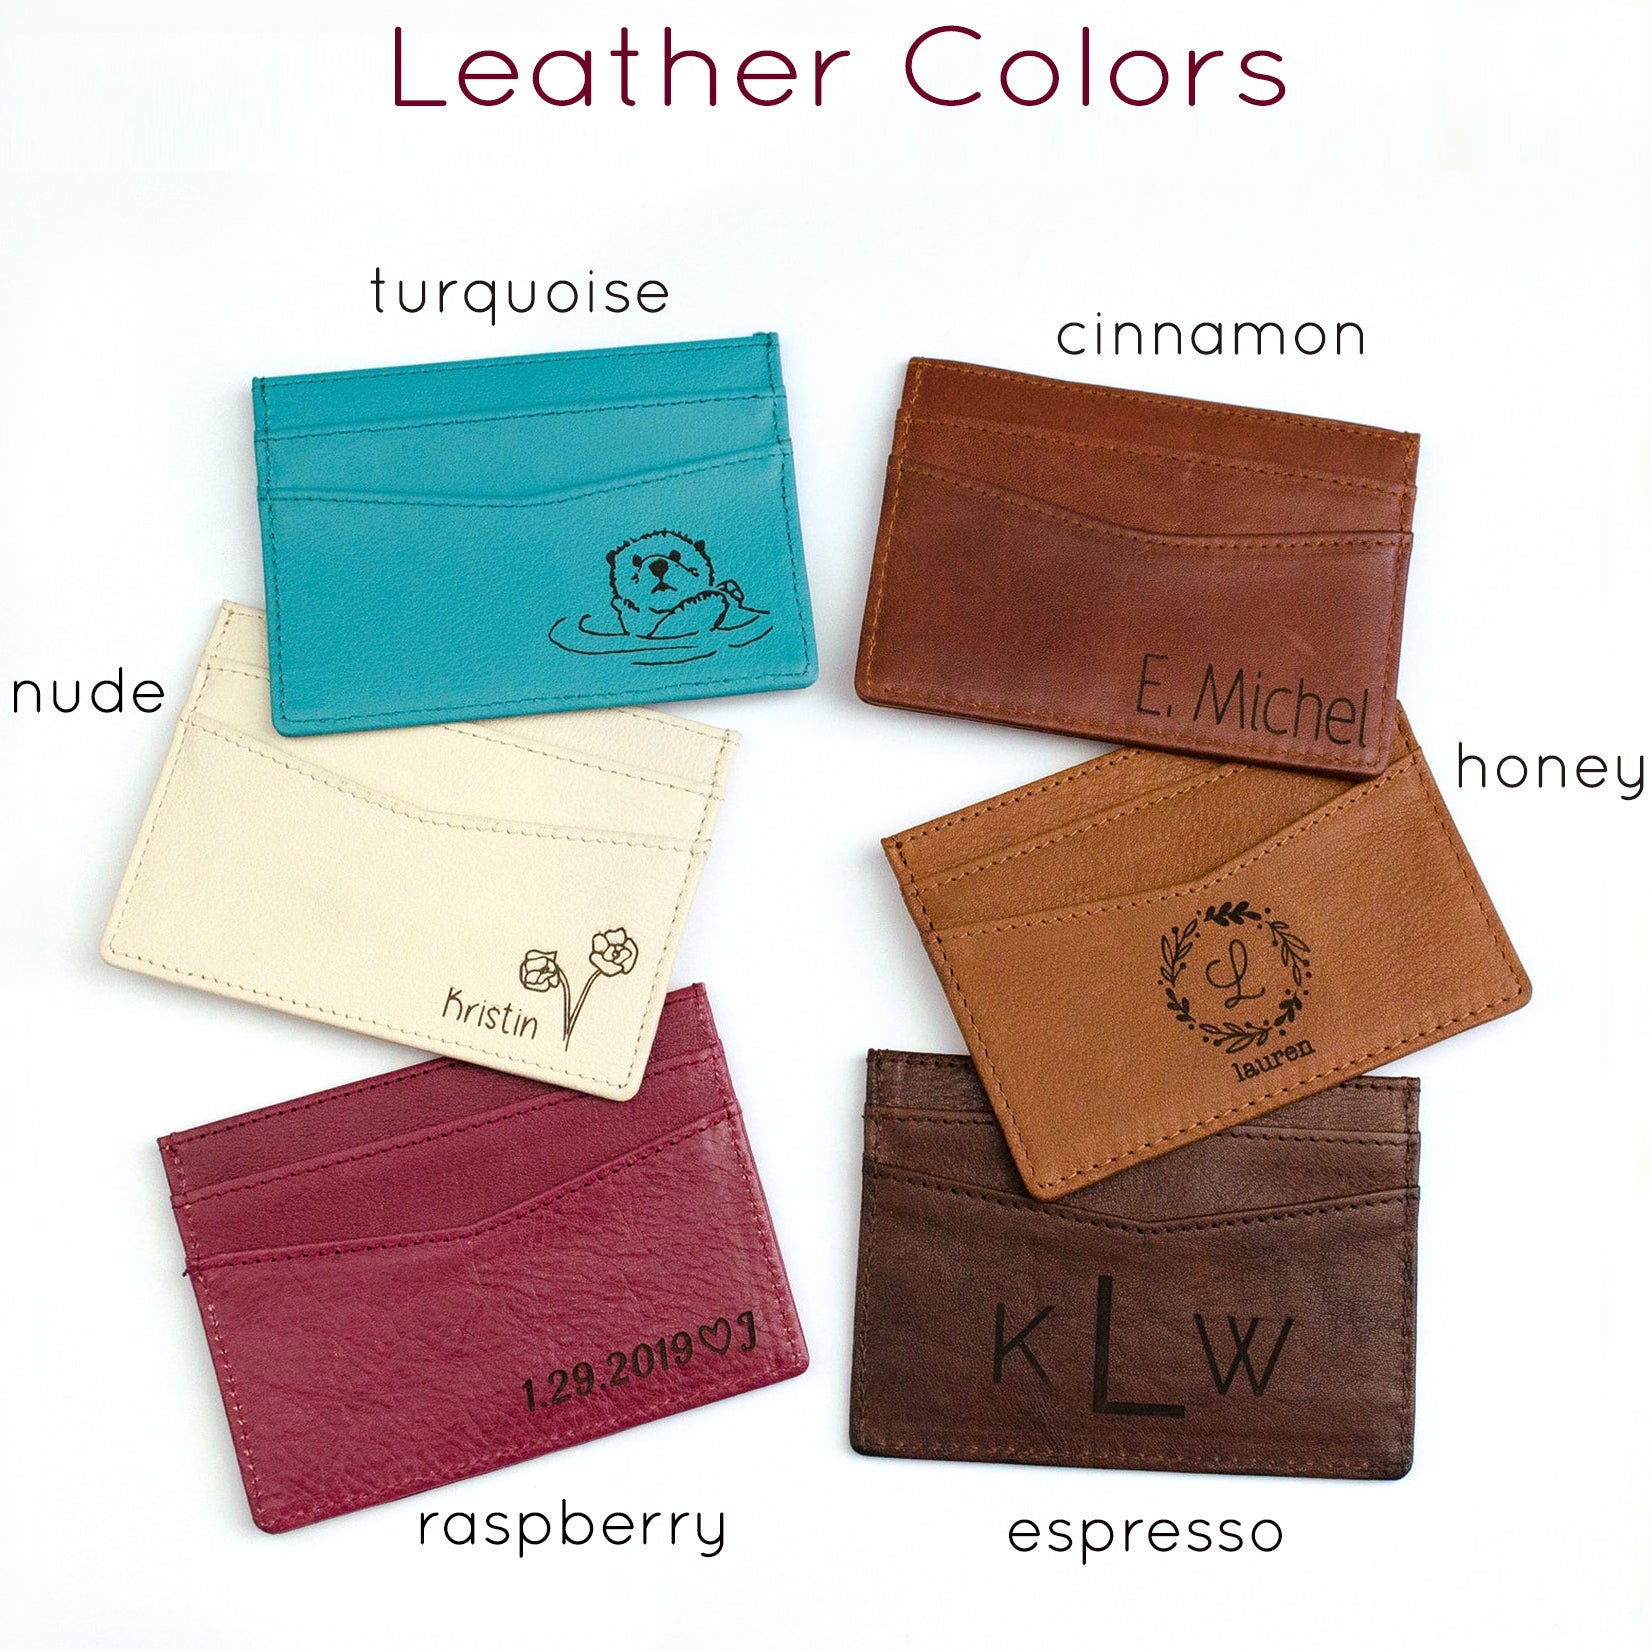 Personalised Men's or Women's Wallet Unique Genuine Leather Card Holder Embossed with Name or initials Birthday Gift Anniversary Present